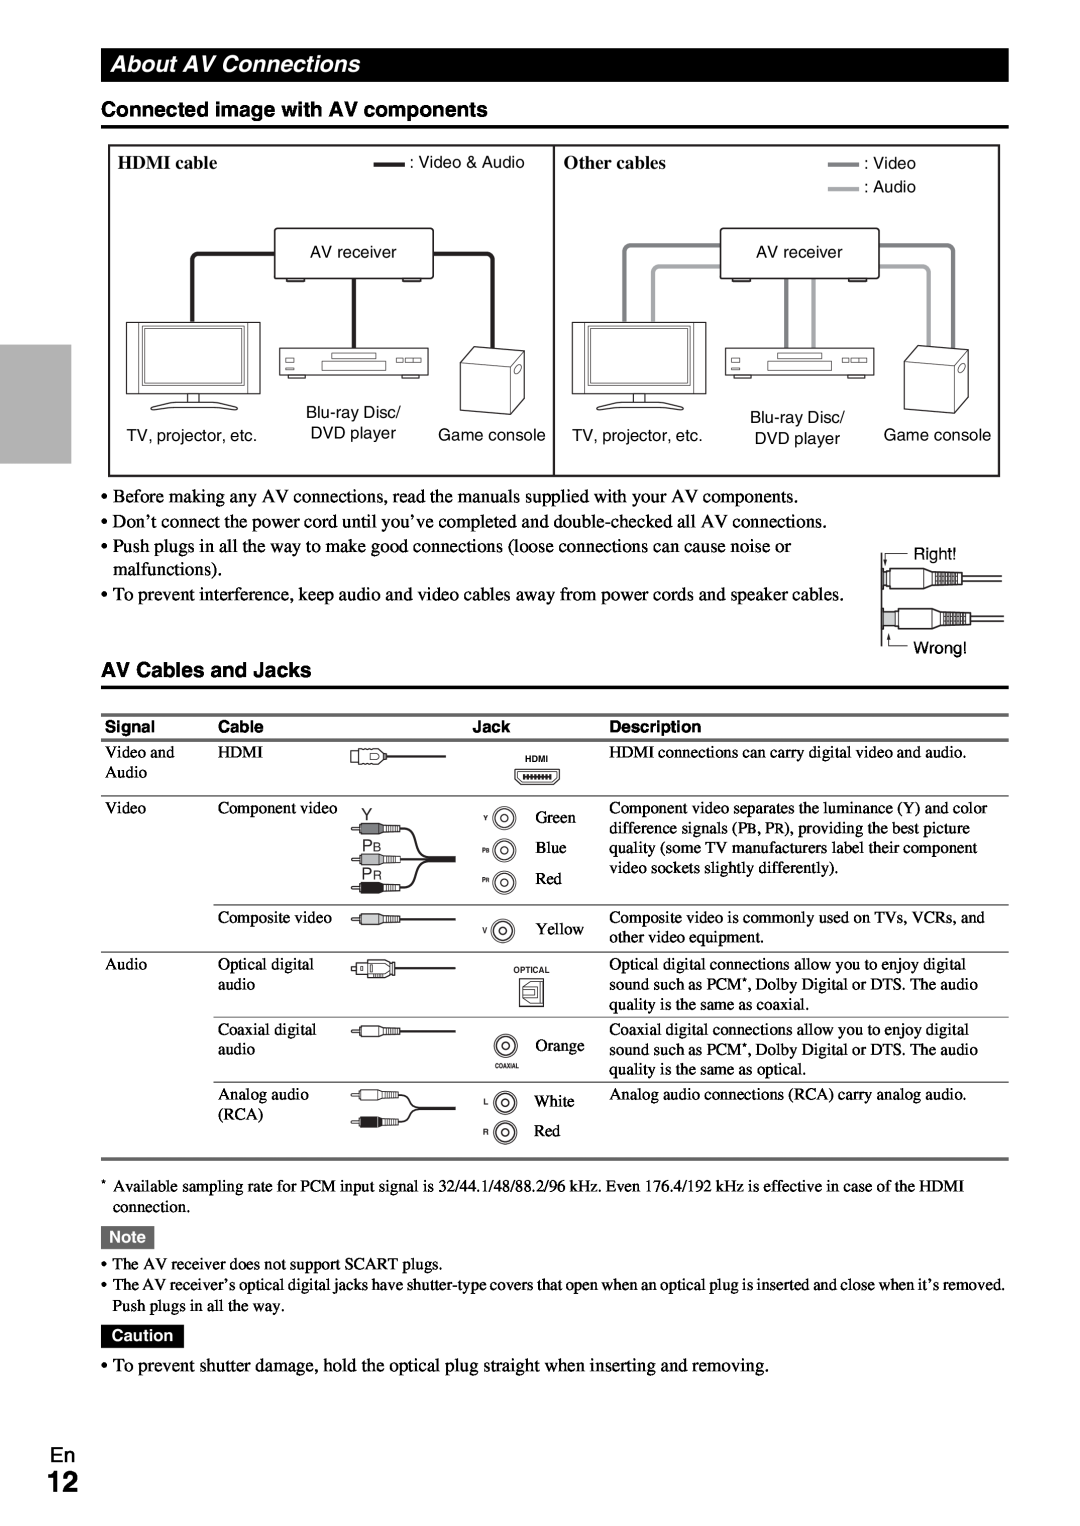 Onkyo HT-R390 instruction manual About AV Connections, Connected image with AV components, AV Cables and Jacks 